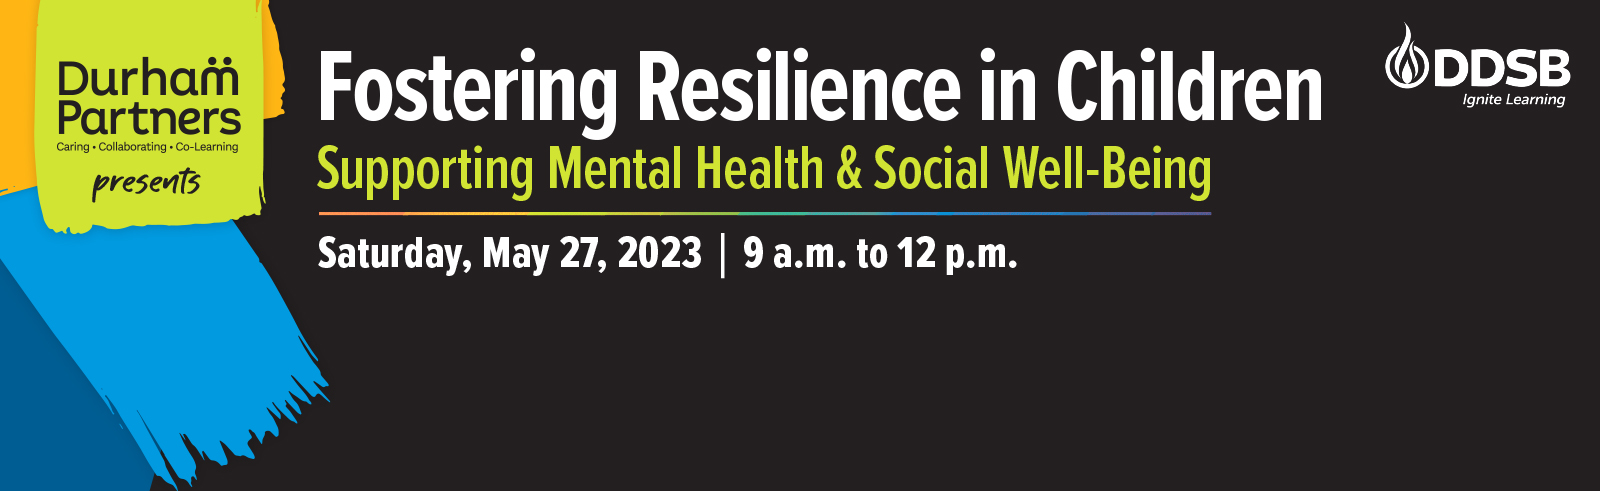 Durham Partners Symposium:  Fostering Resilience in Children